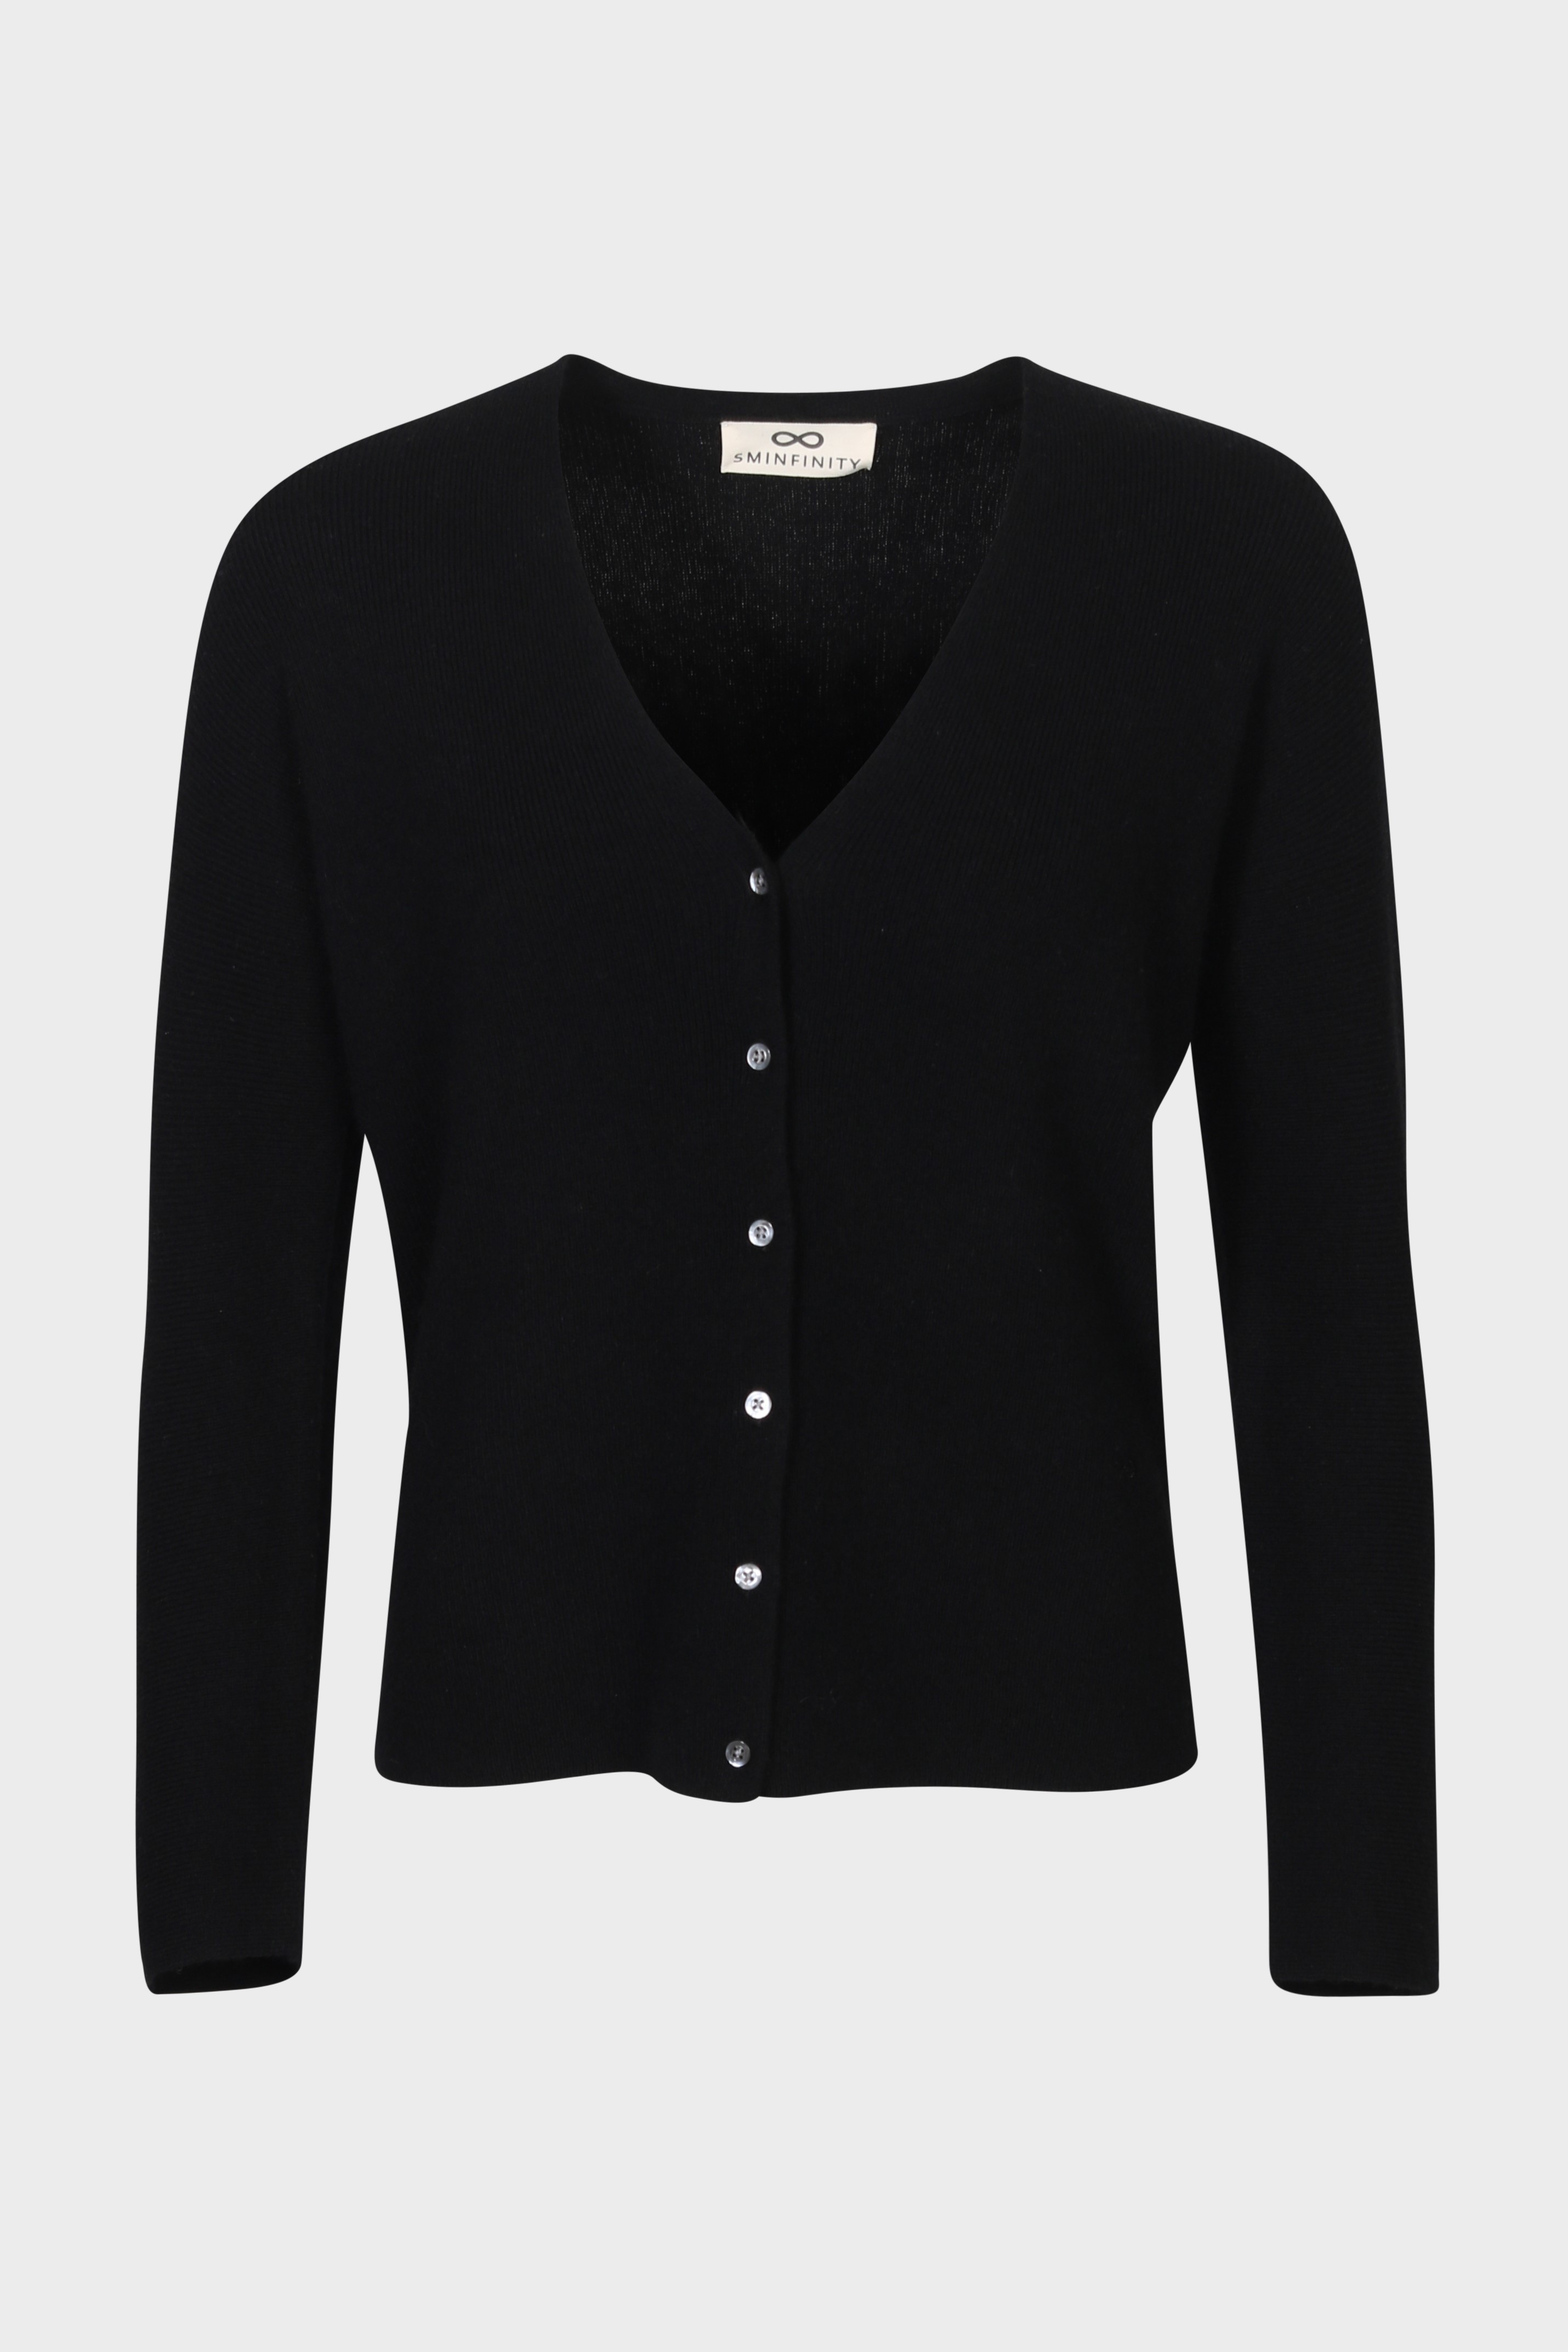 SMINFINITY Chilly Fitted Knit Cardigan in Black XS